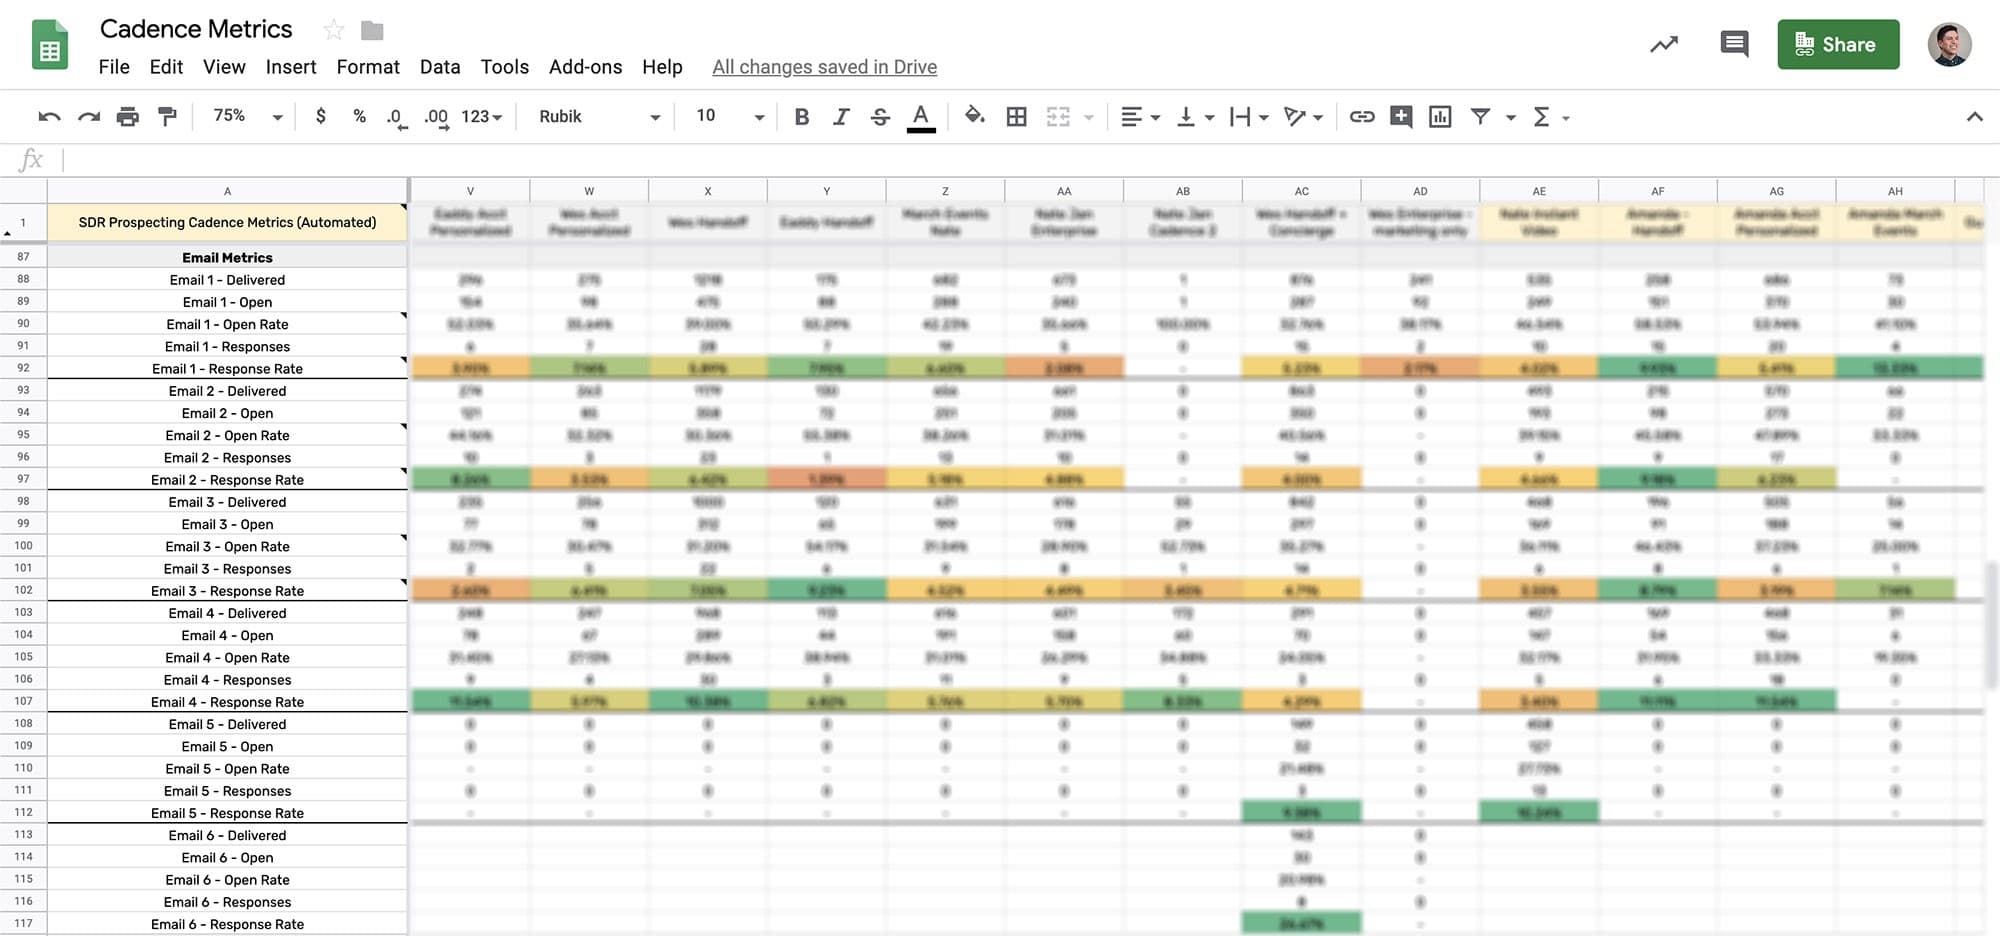 Conditional formatting made it easy to spot wins.